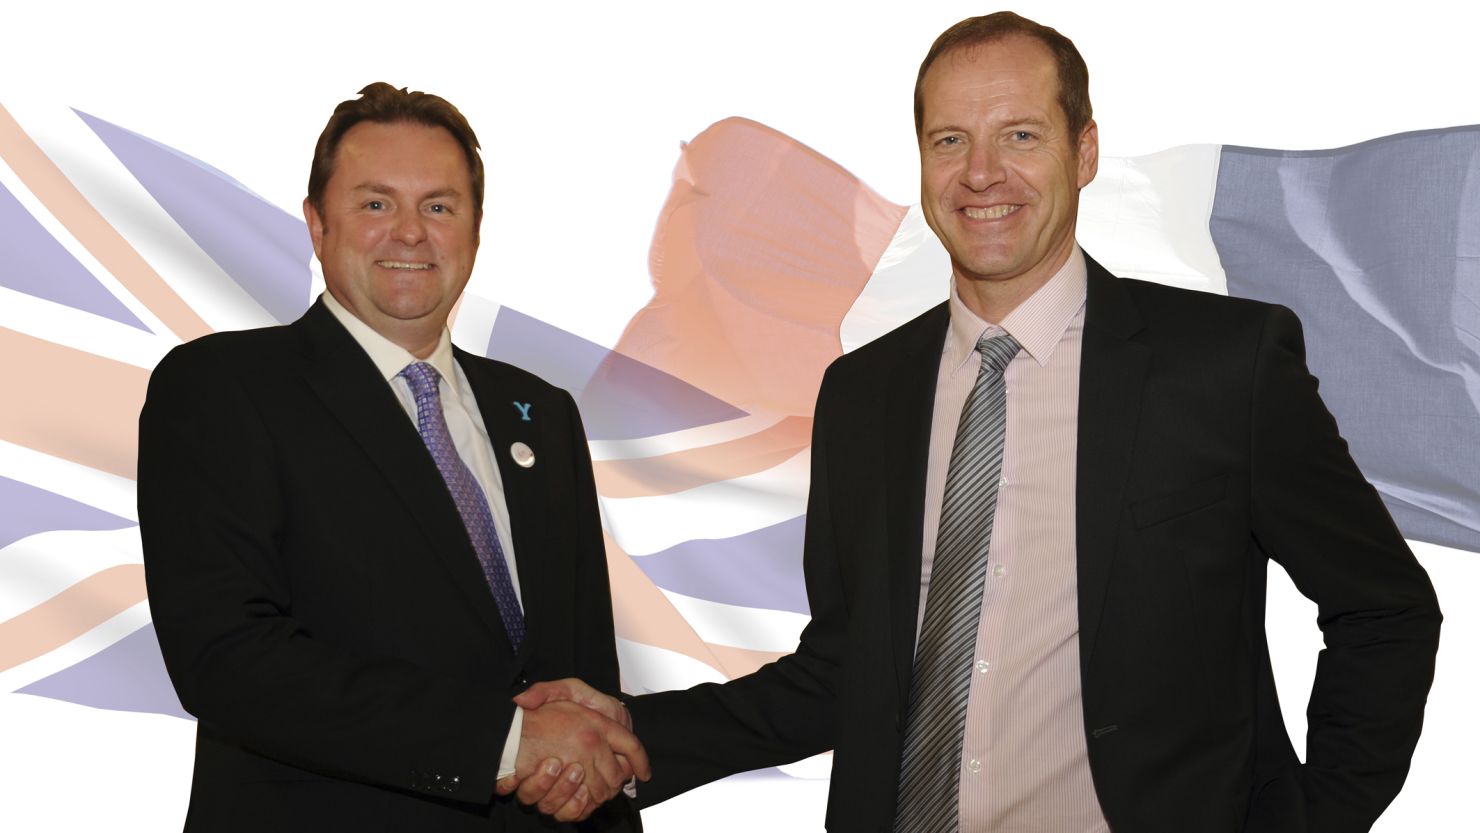 Shake on it. Gary Verity, chief executive of Welcome to Yorkshire, and Tour organizer Christian Prudhomme seal the 2014 deal.